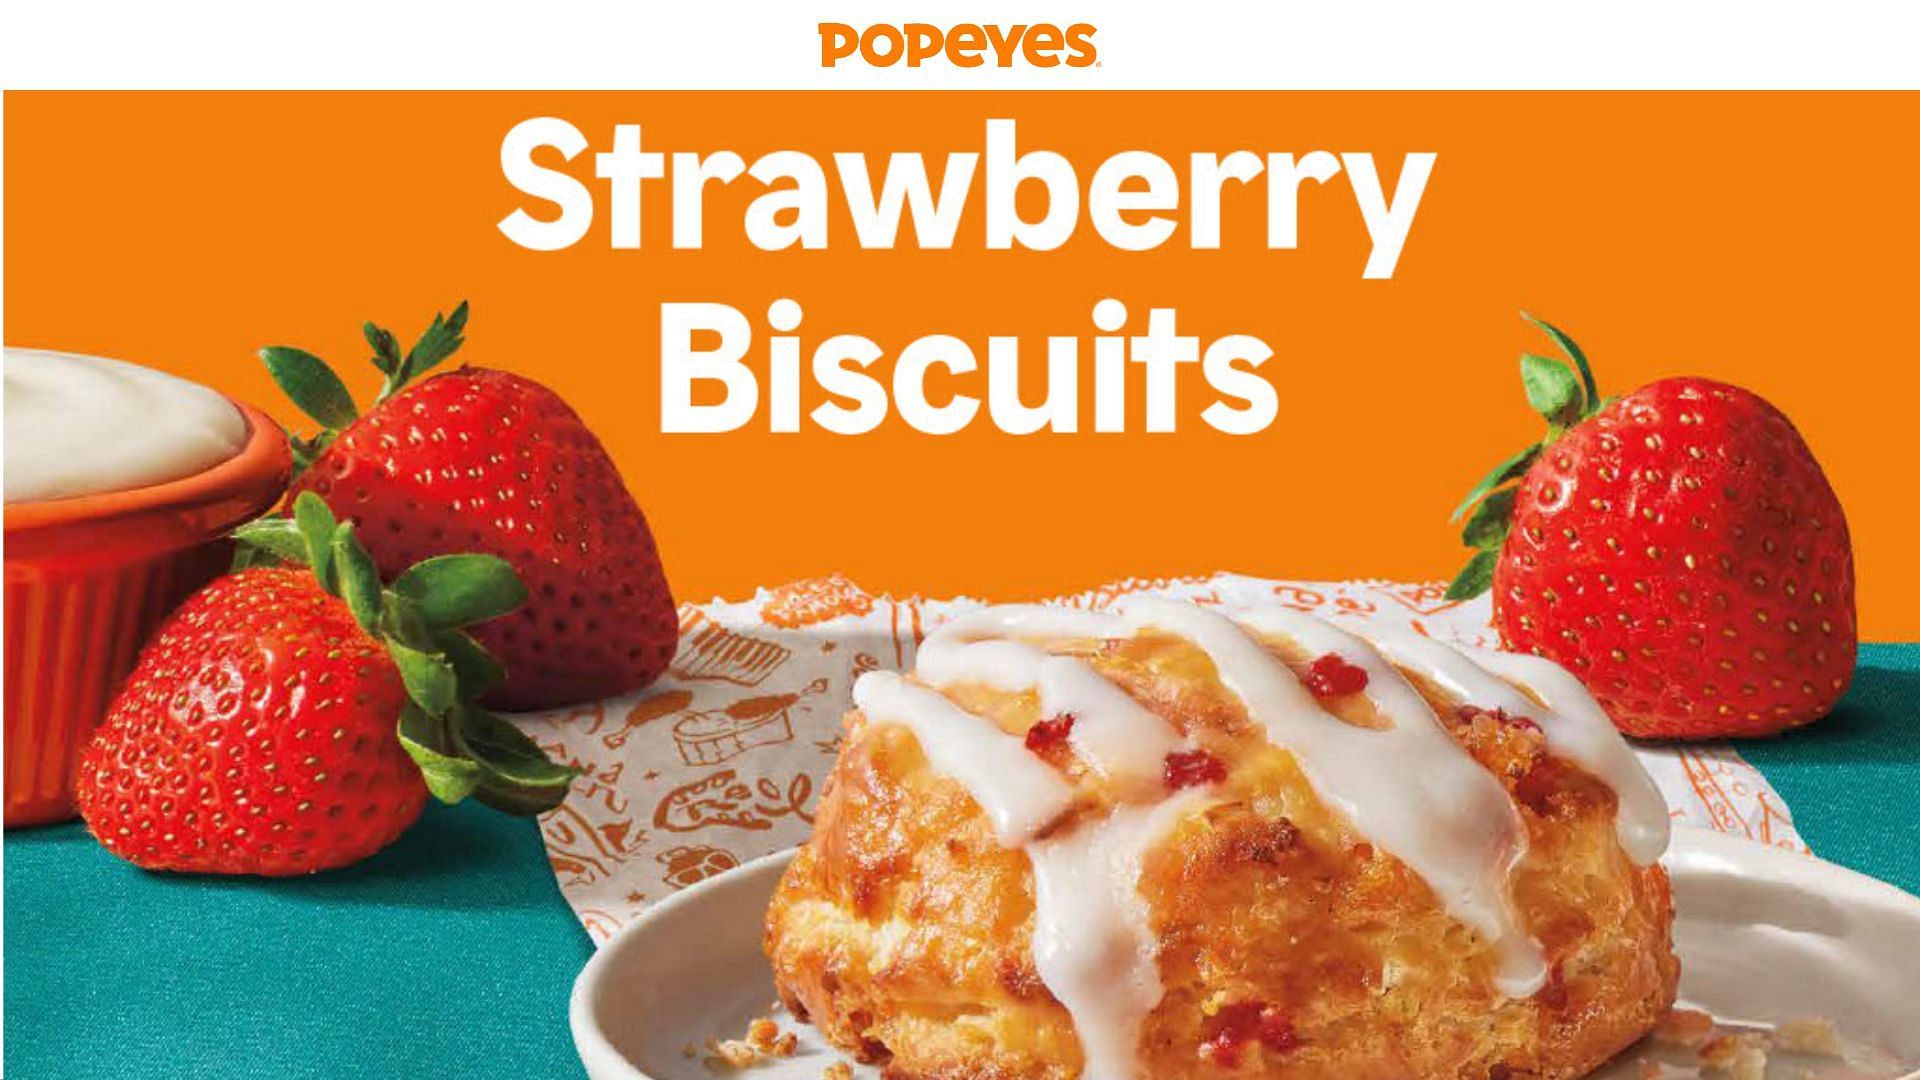 Popeyes introduces new Strawberry Biscuits to its menu for a limited time (Image via Popeyes)